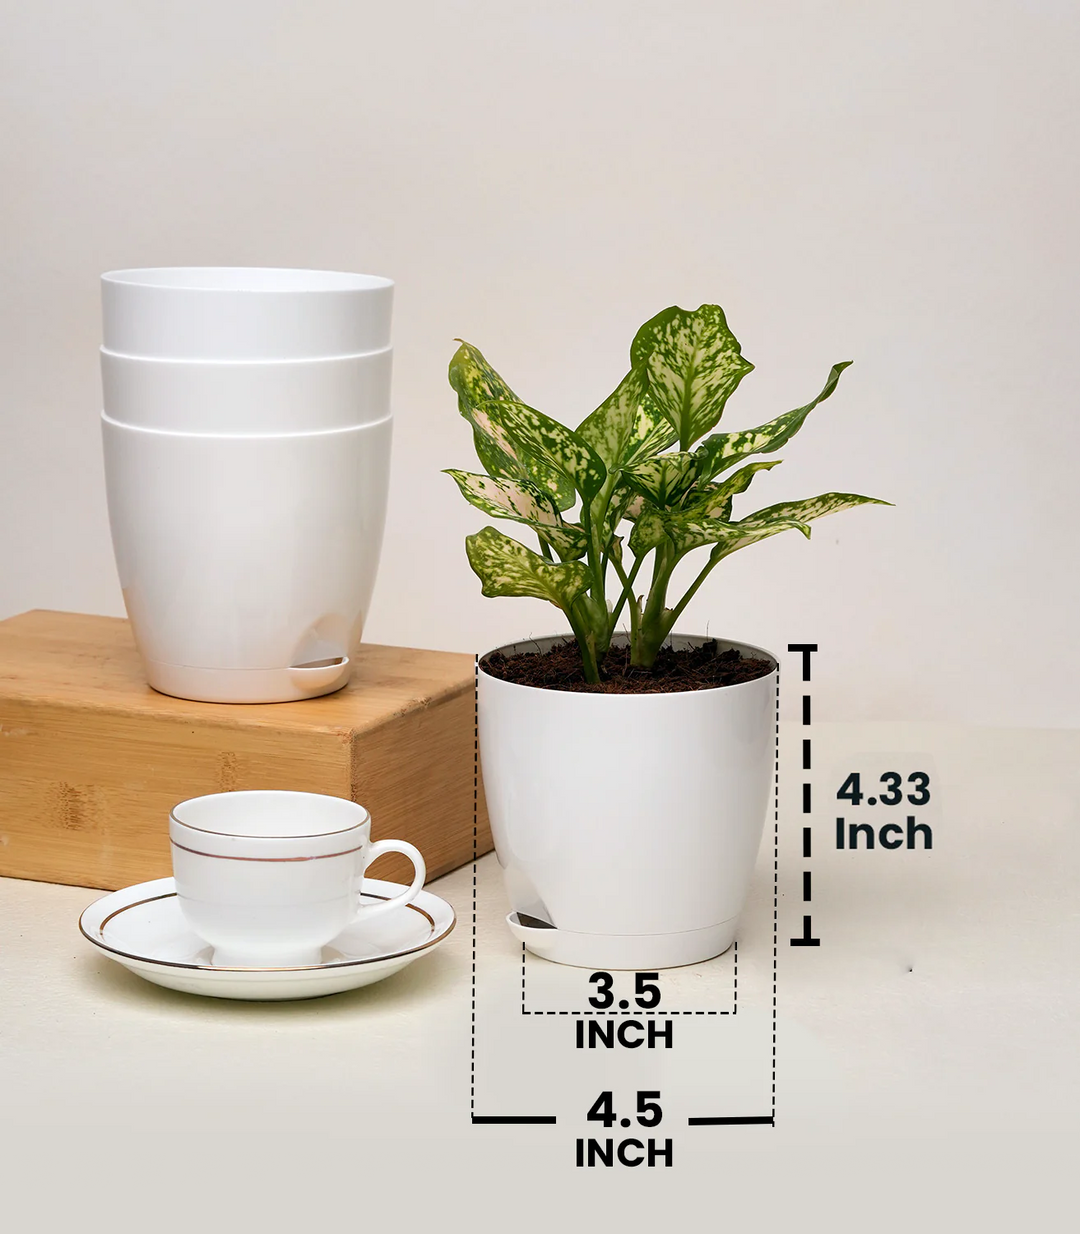 Self-Watering Pots for Small Plants | Set of 2 Self-Watering 4-Inch Plastic Pots (White & Mocha)